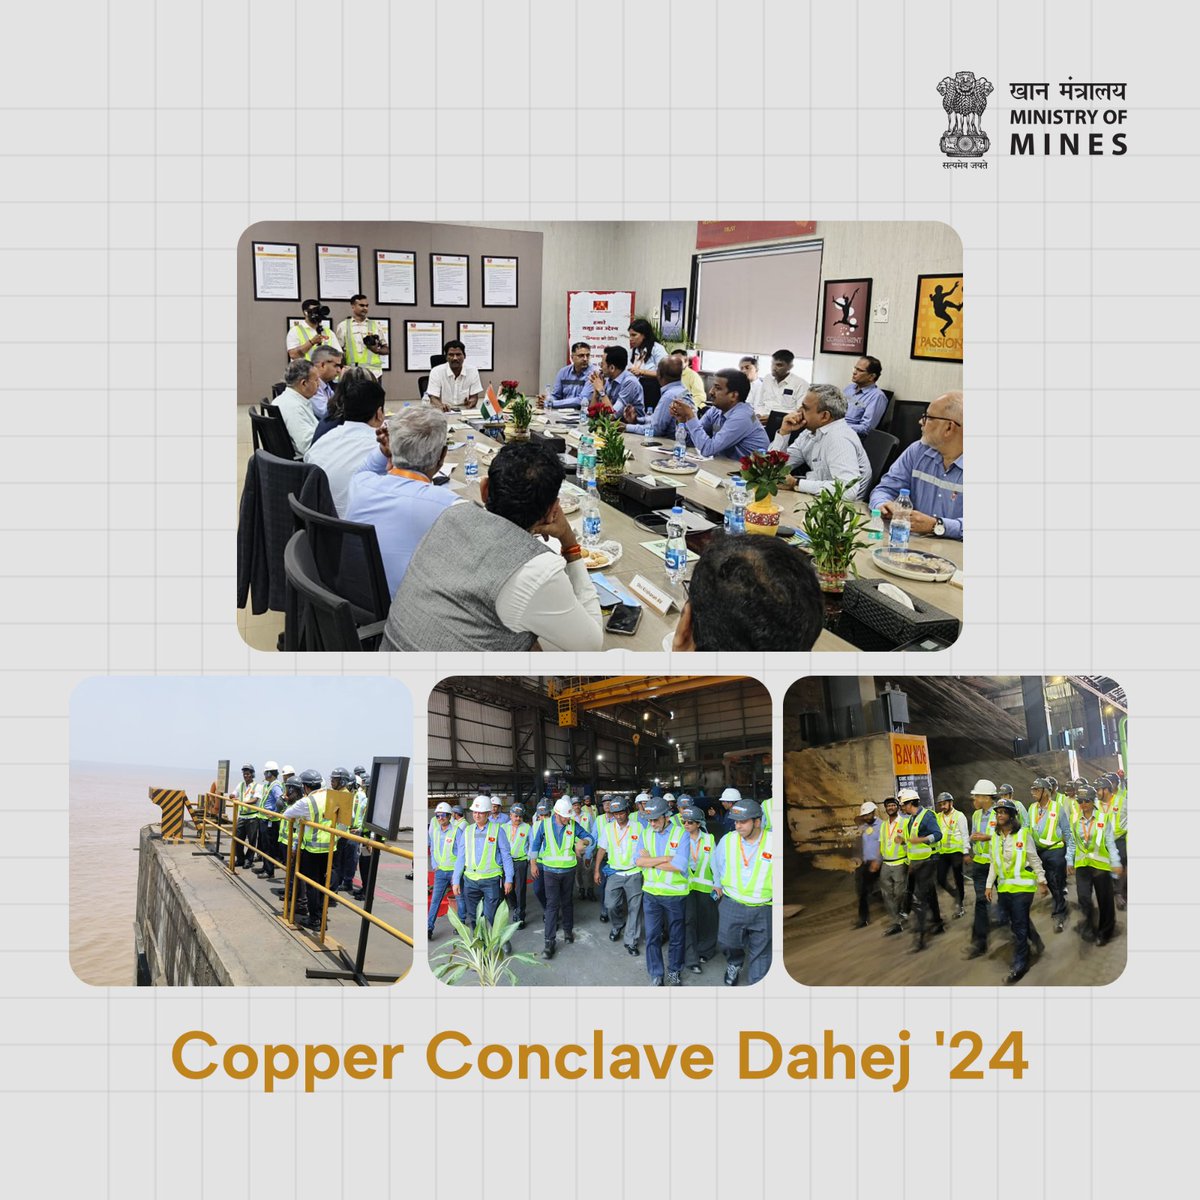 Shri V L Kantha Rao, Secretary, @MinesMinIndia addresses the copper industry leaders during the Copper Conclave Dahej’ 24. Prior to this, he visited the facilities of Birla Copper at Dahej including jetty, smelter, refinery and Rod mill. Shri Rao also chaired a Brainstorming